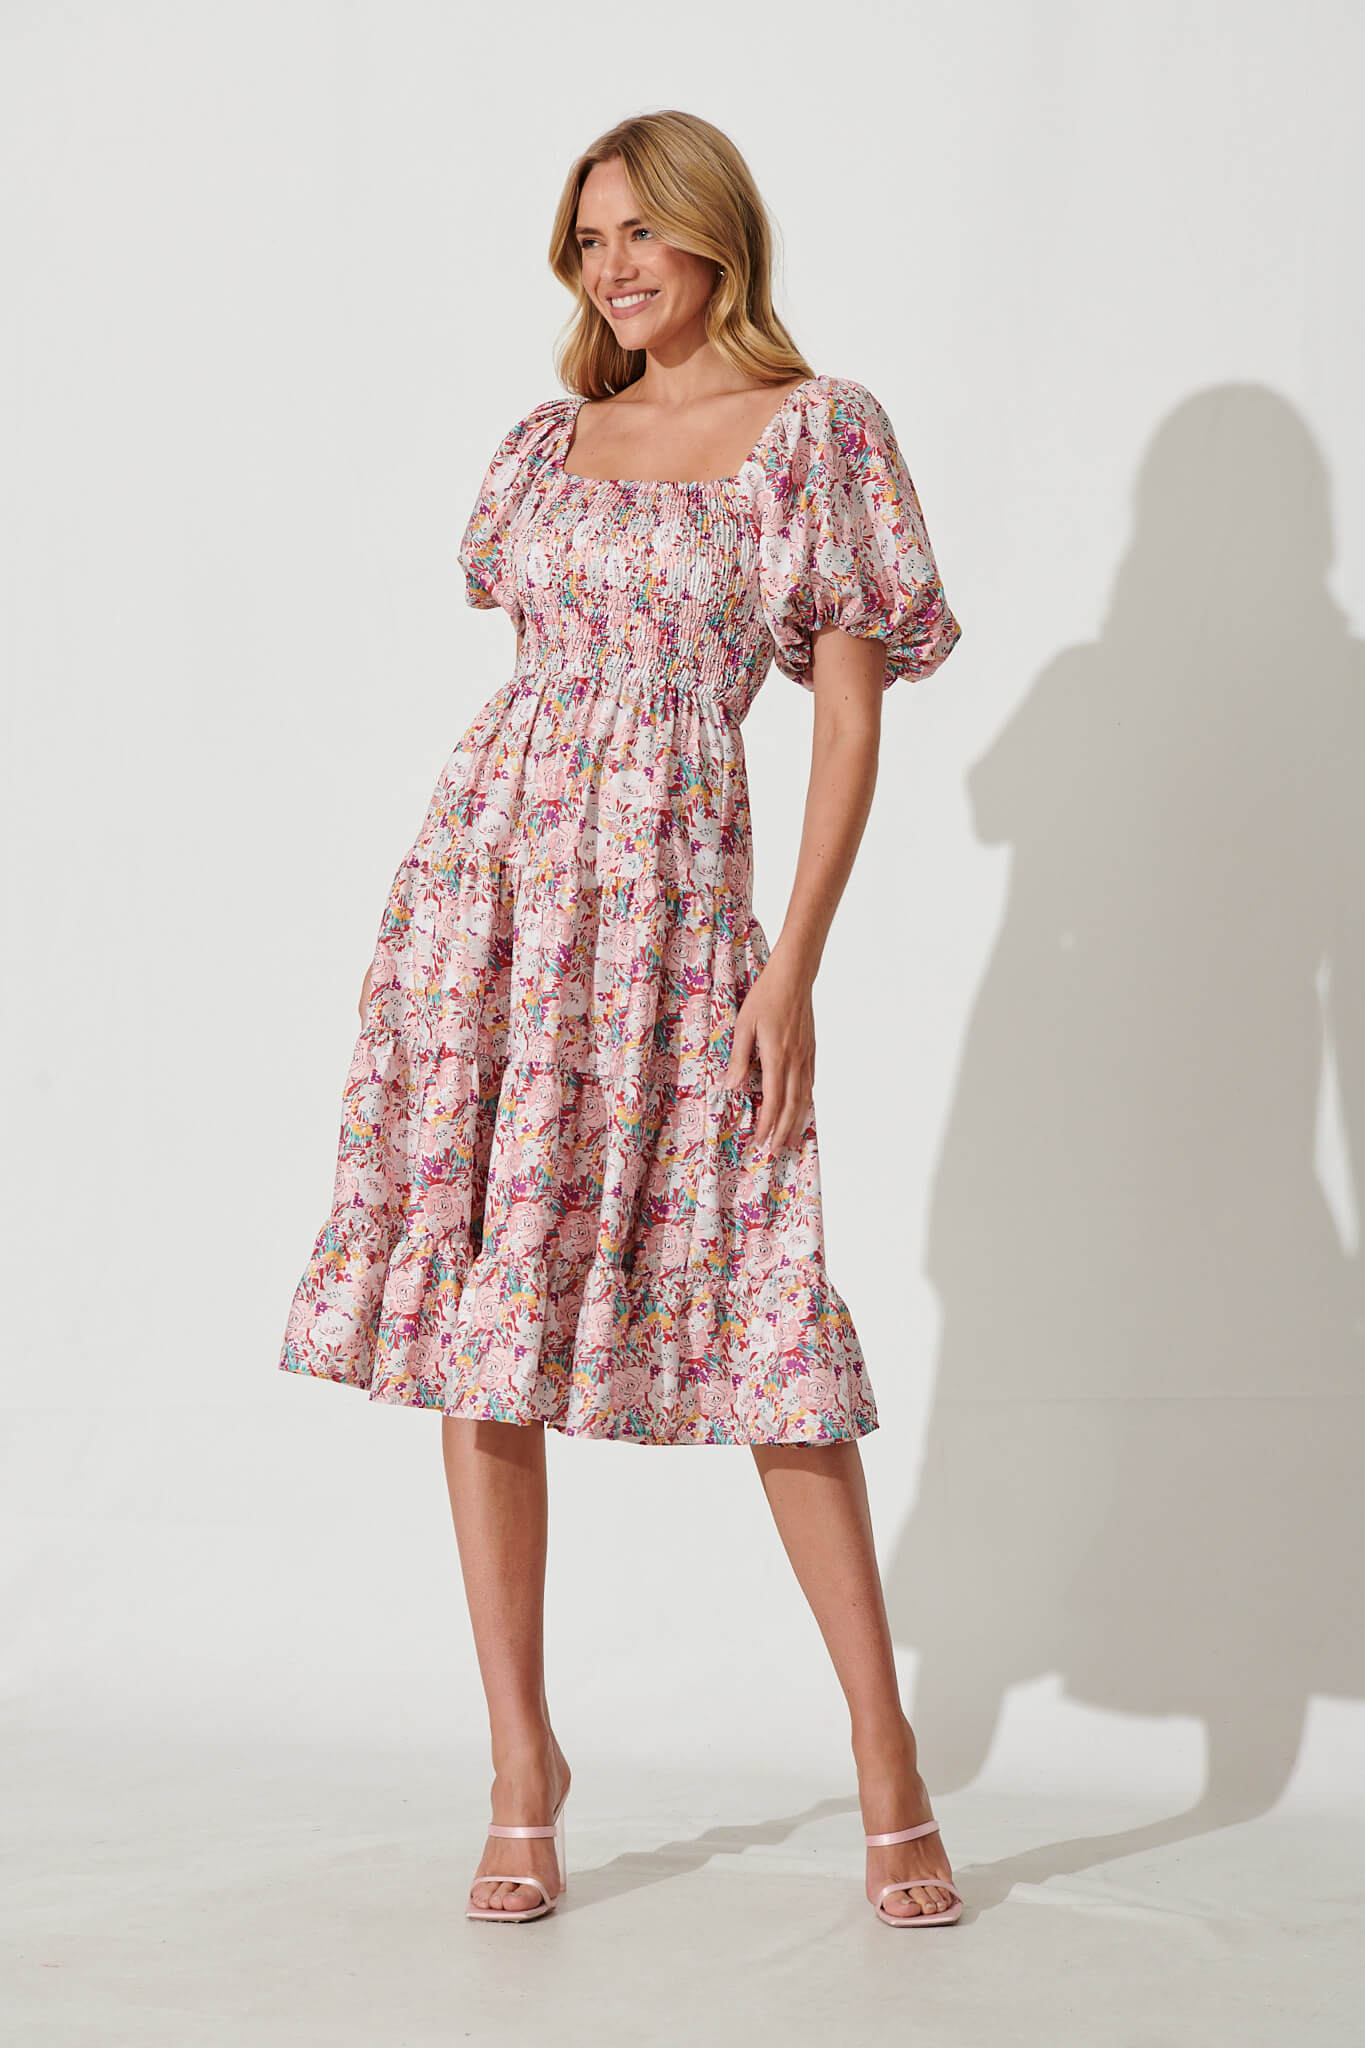 Anytime Midi Dress In Multi Pink Floral Cotton Blend - full length